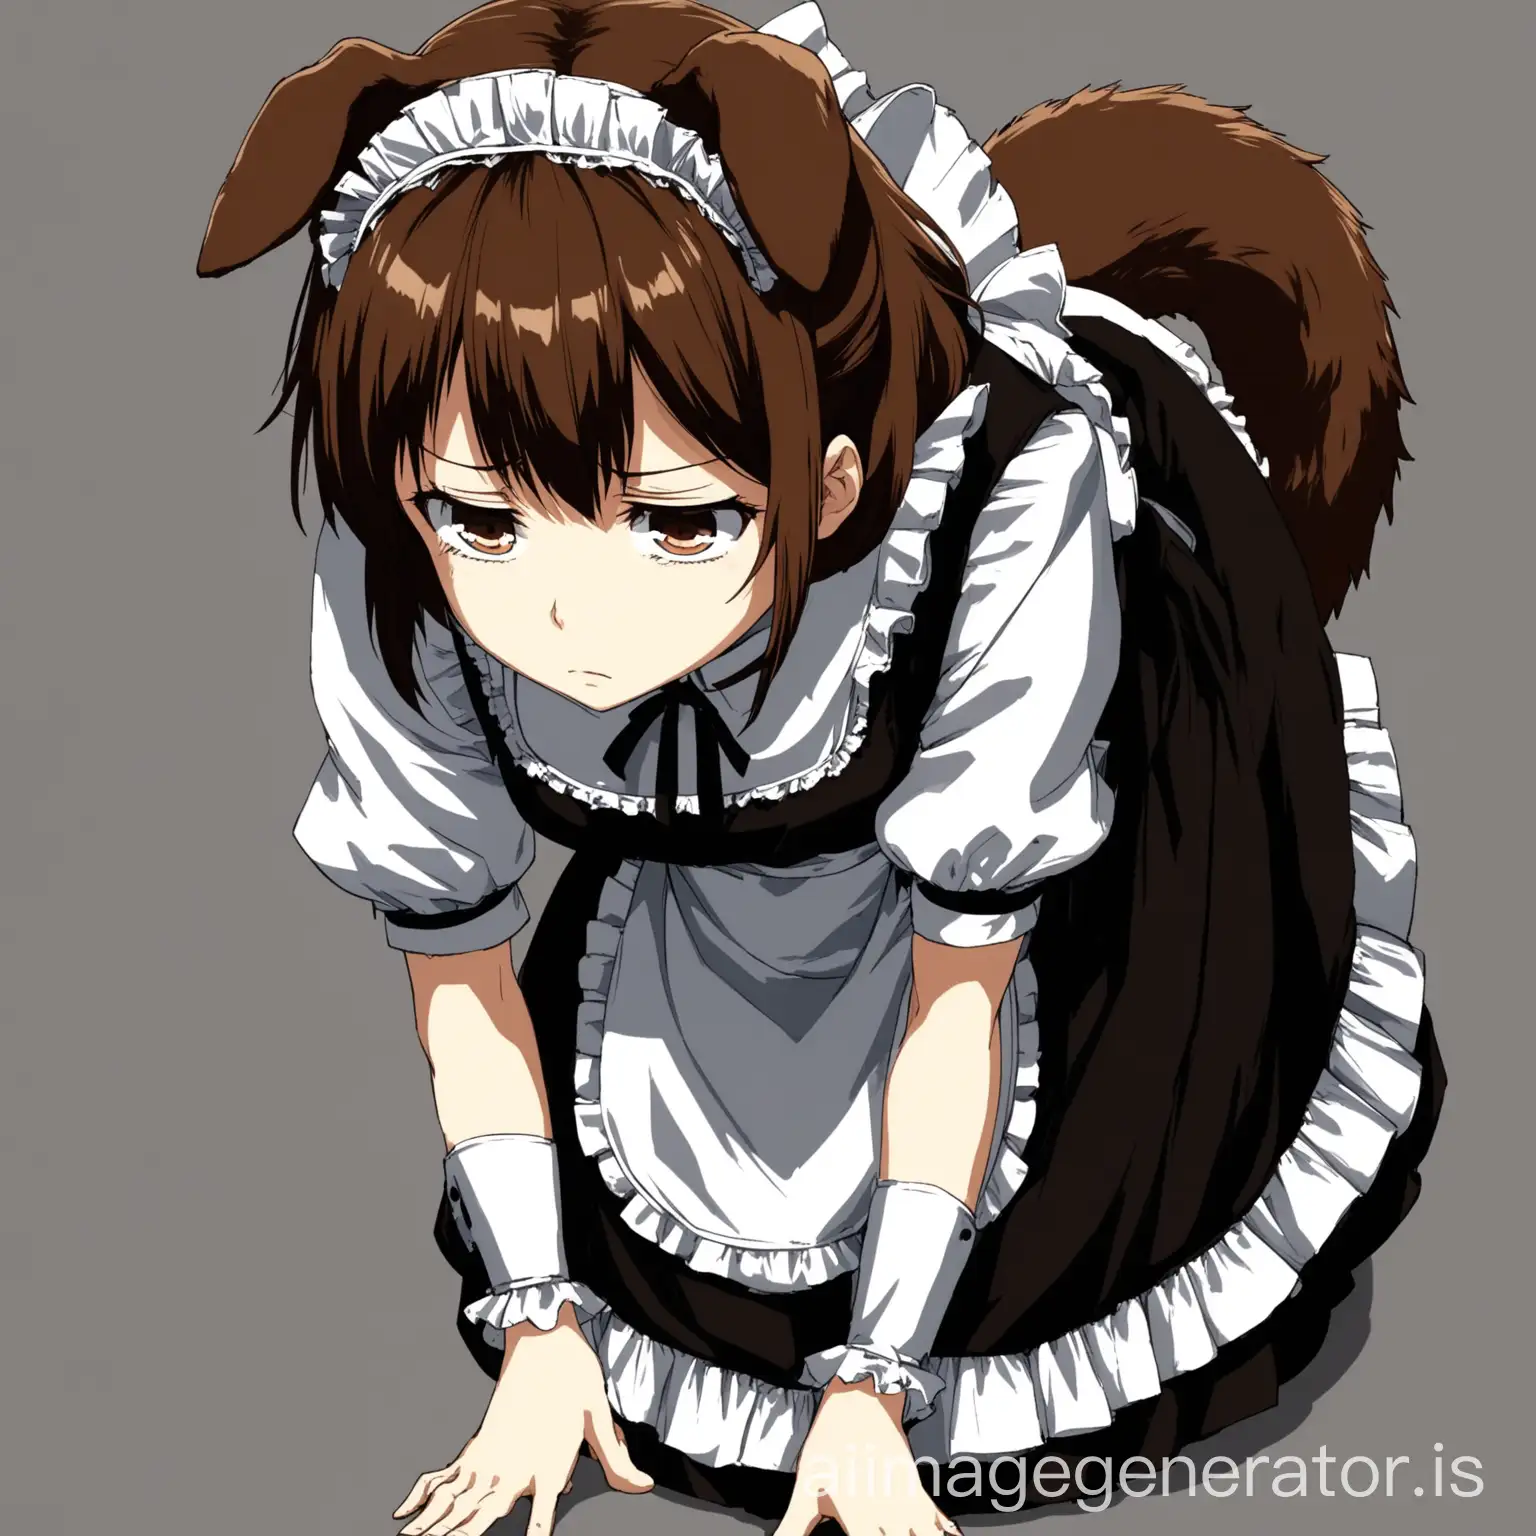 Anime girl bowing down looking up slightlt with her head. Dog ears and tail. Maid dress. Emberessed expression on her face. Bowing down like a servent. DOG EARS. Brown hair